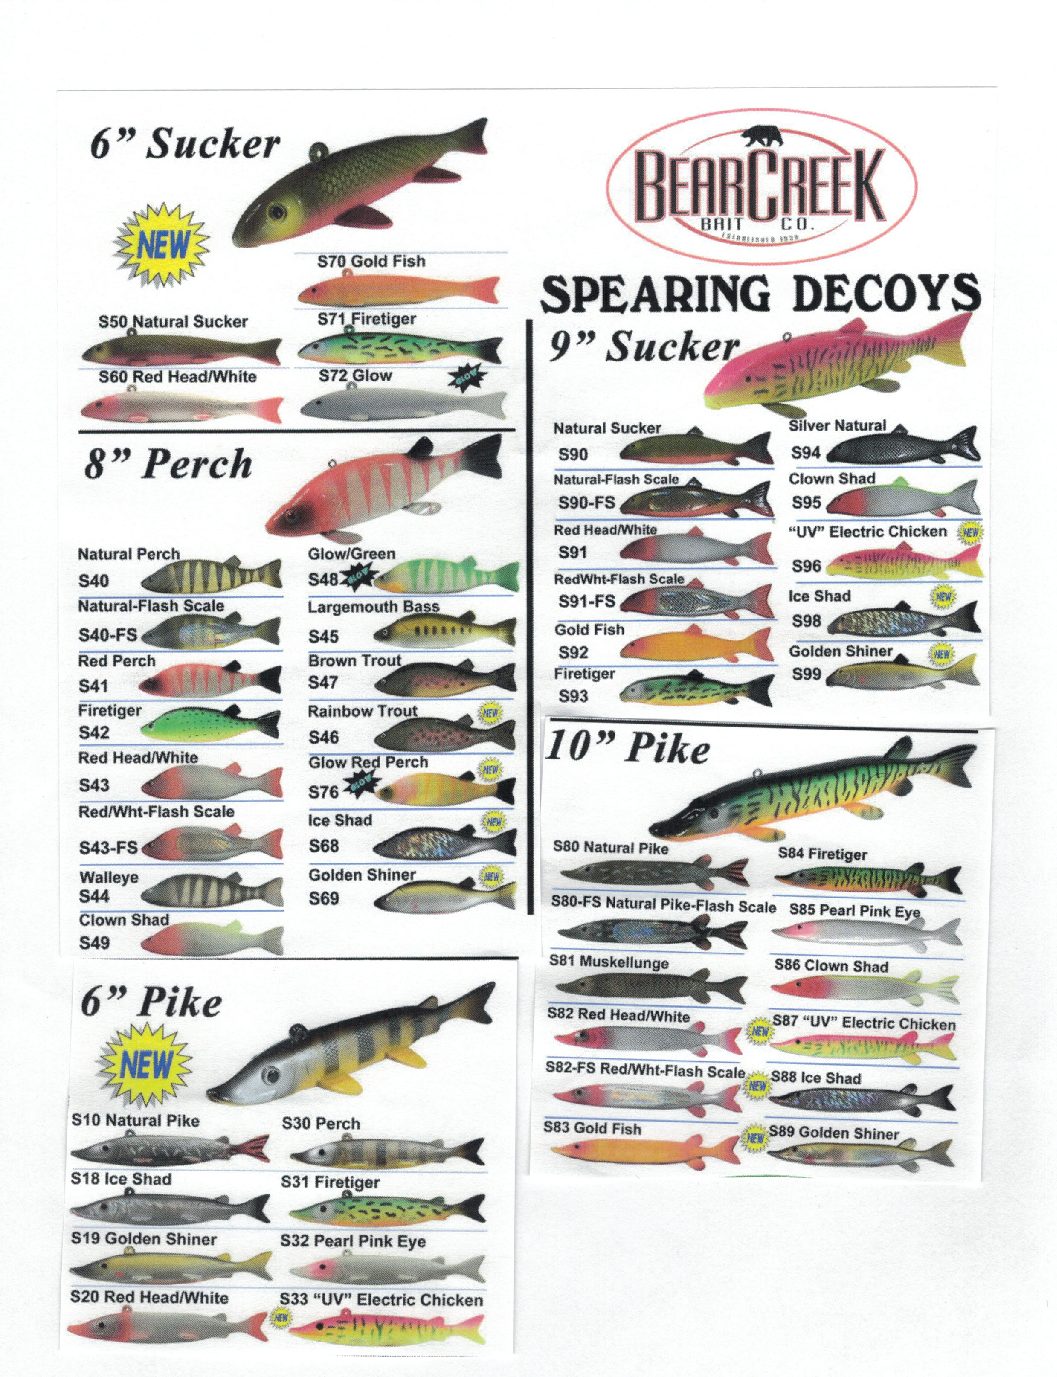 Lures Teasers Display Stands for Fish Decoys 